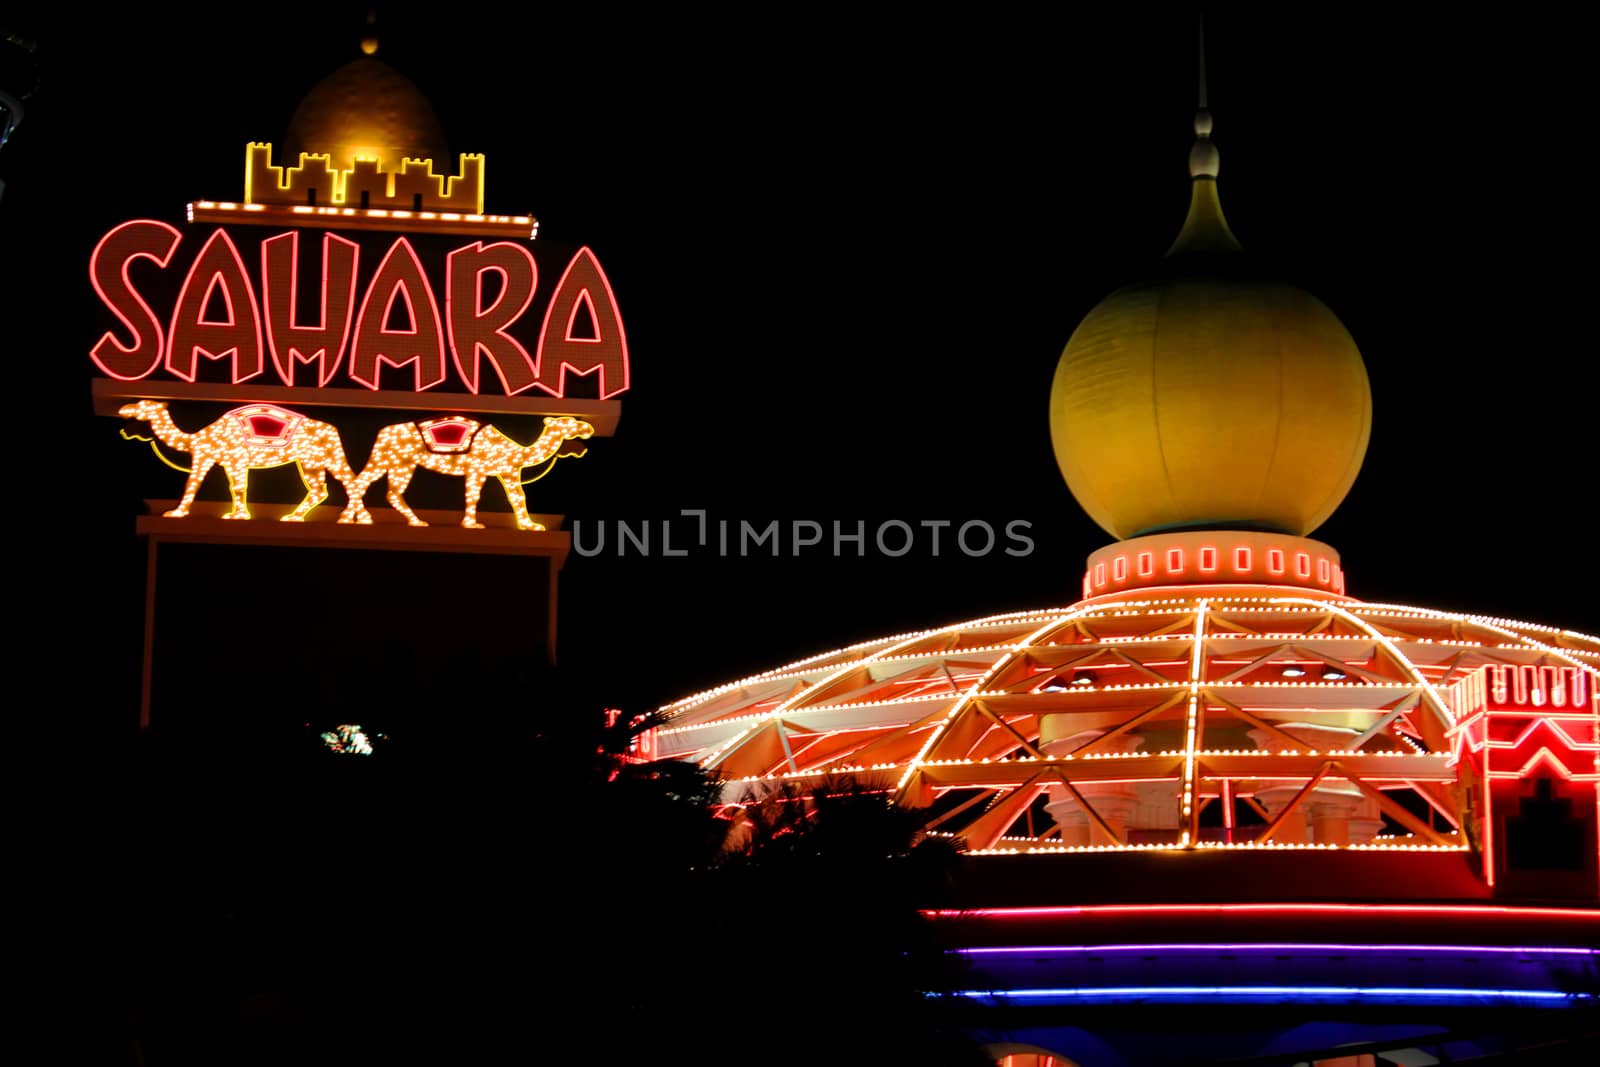 Las Vegas, USA - August 26, 2009: The Sahara Hotel and Casino in Las Vegas, Nevada.  The Sahara was opened in 1952 and closed in 2011.